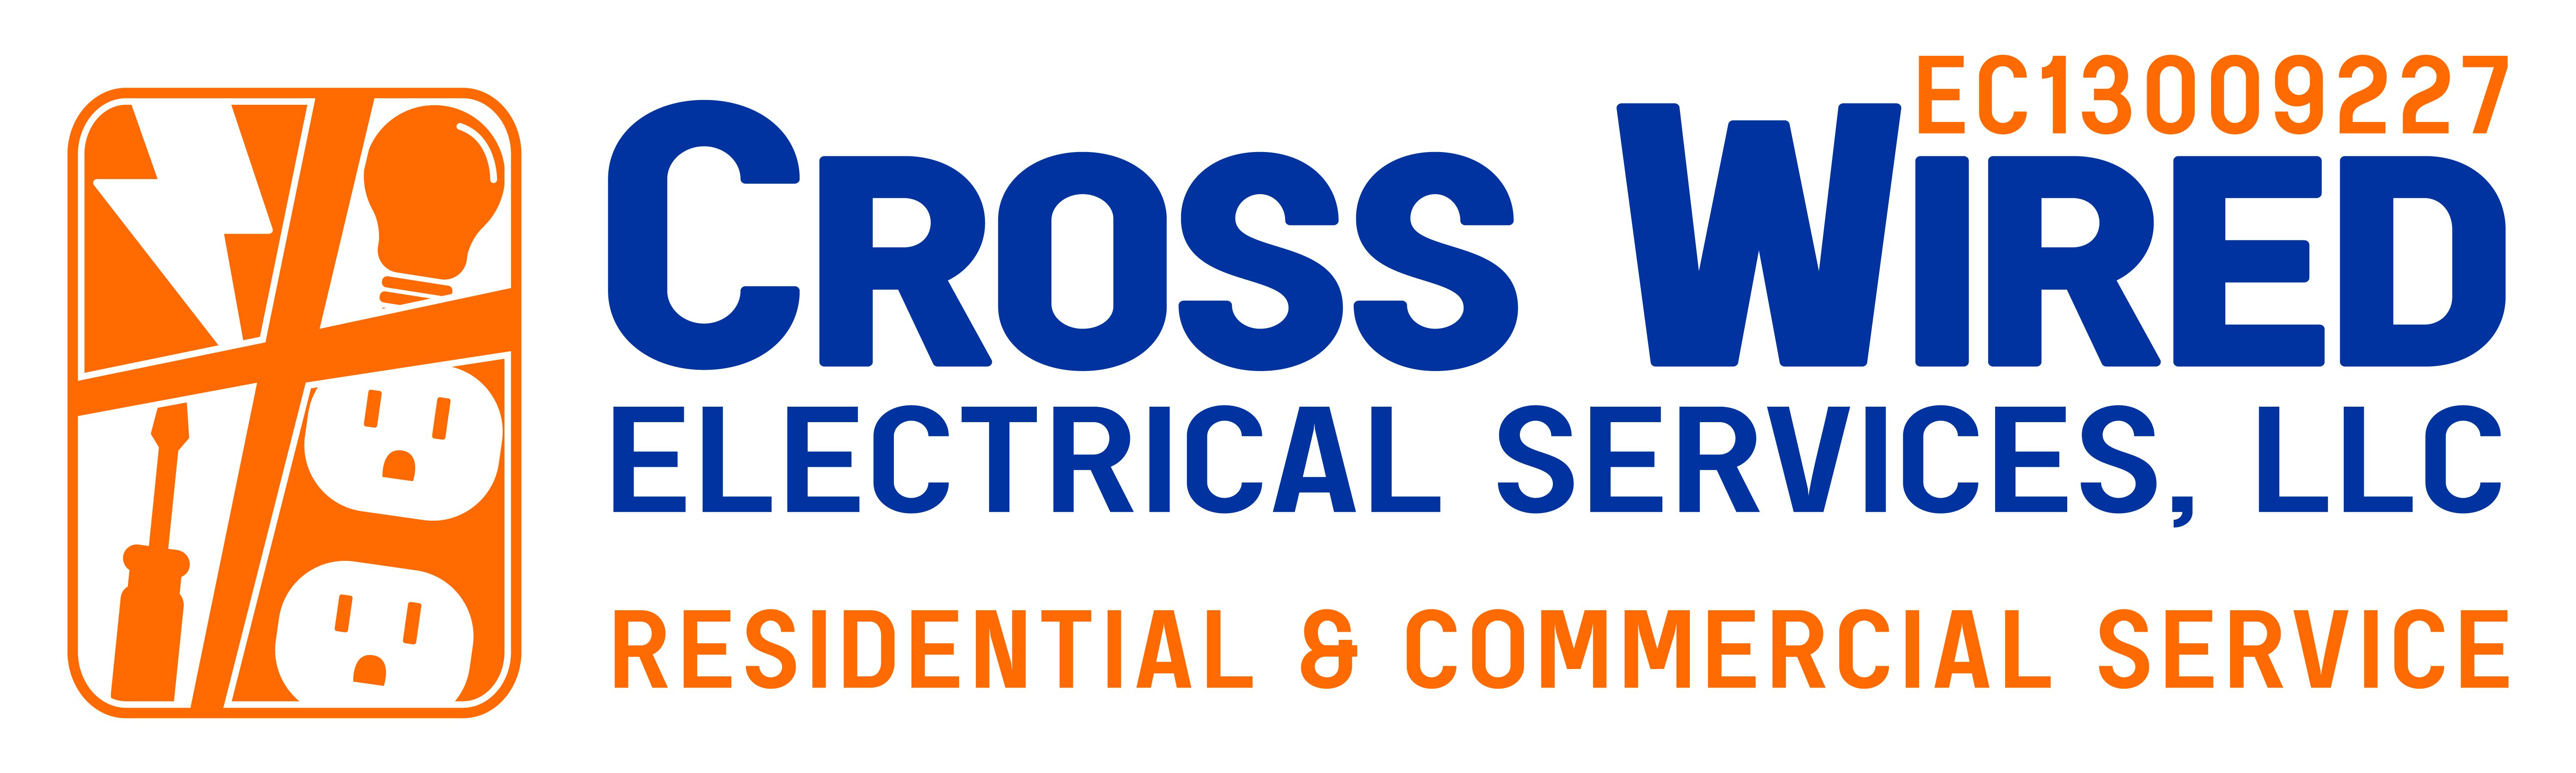 Cross Wired Electrical Services, LLC Logo